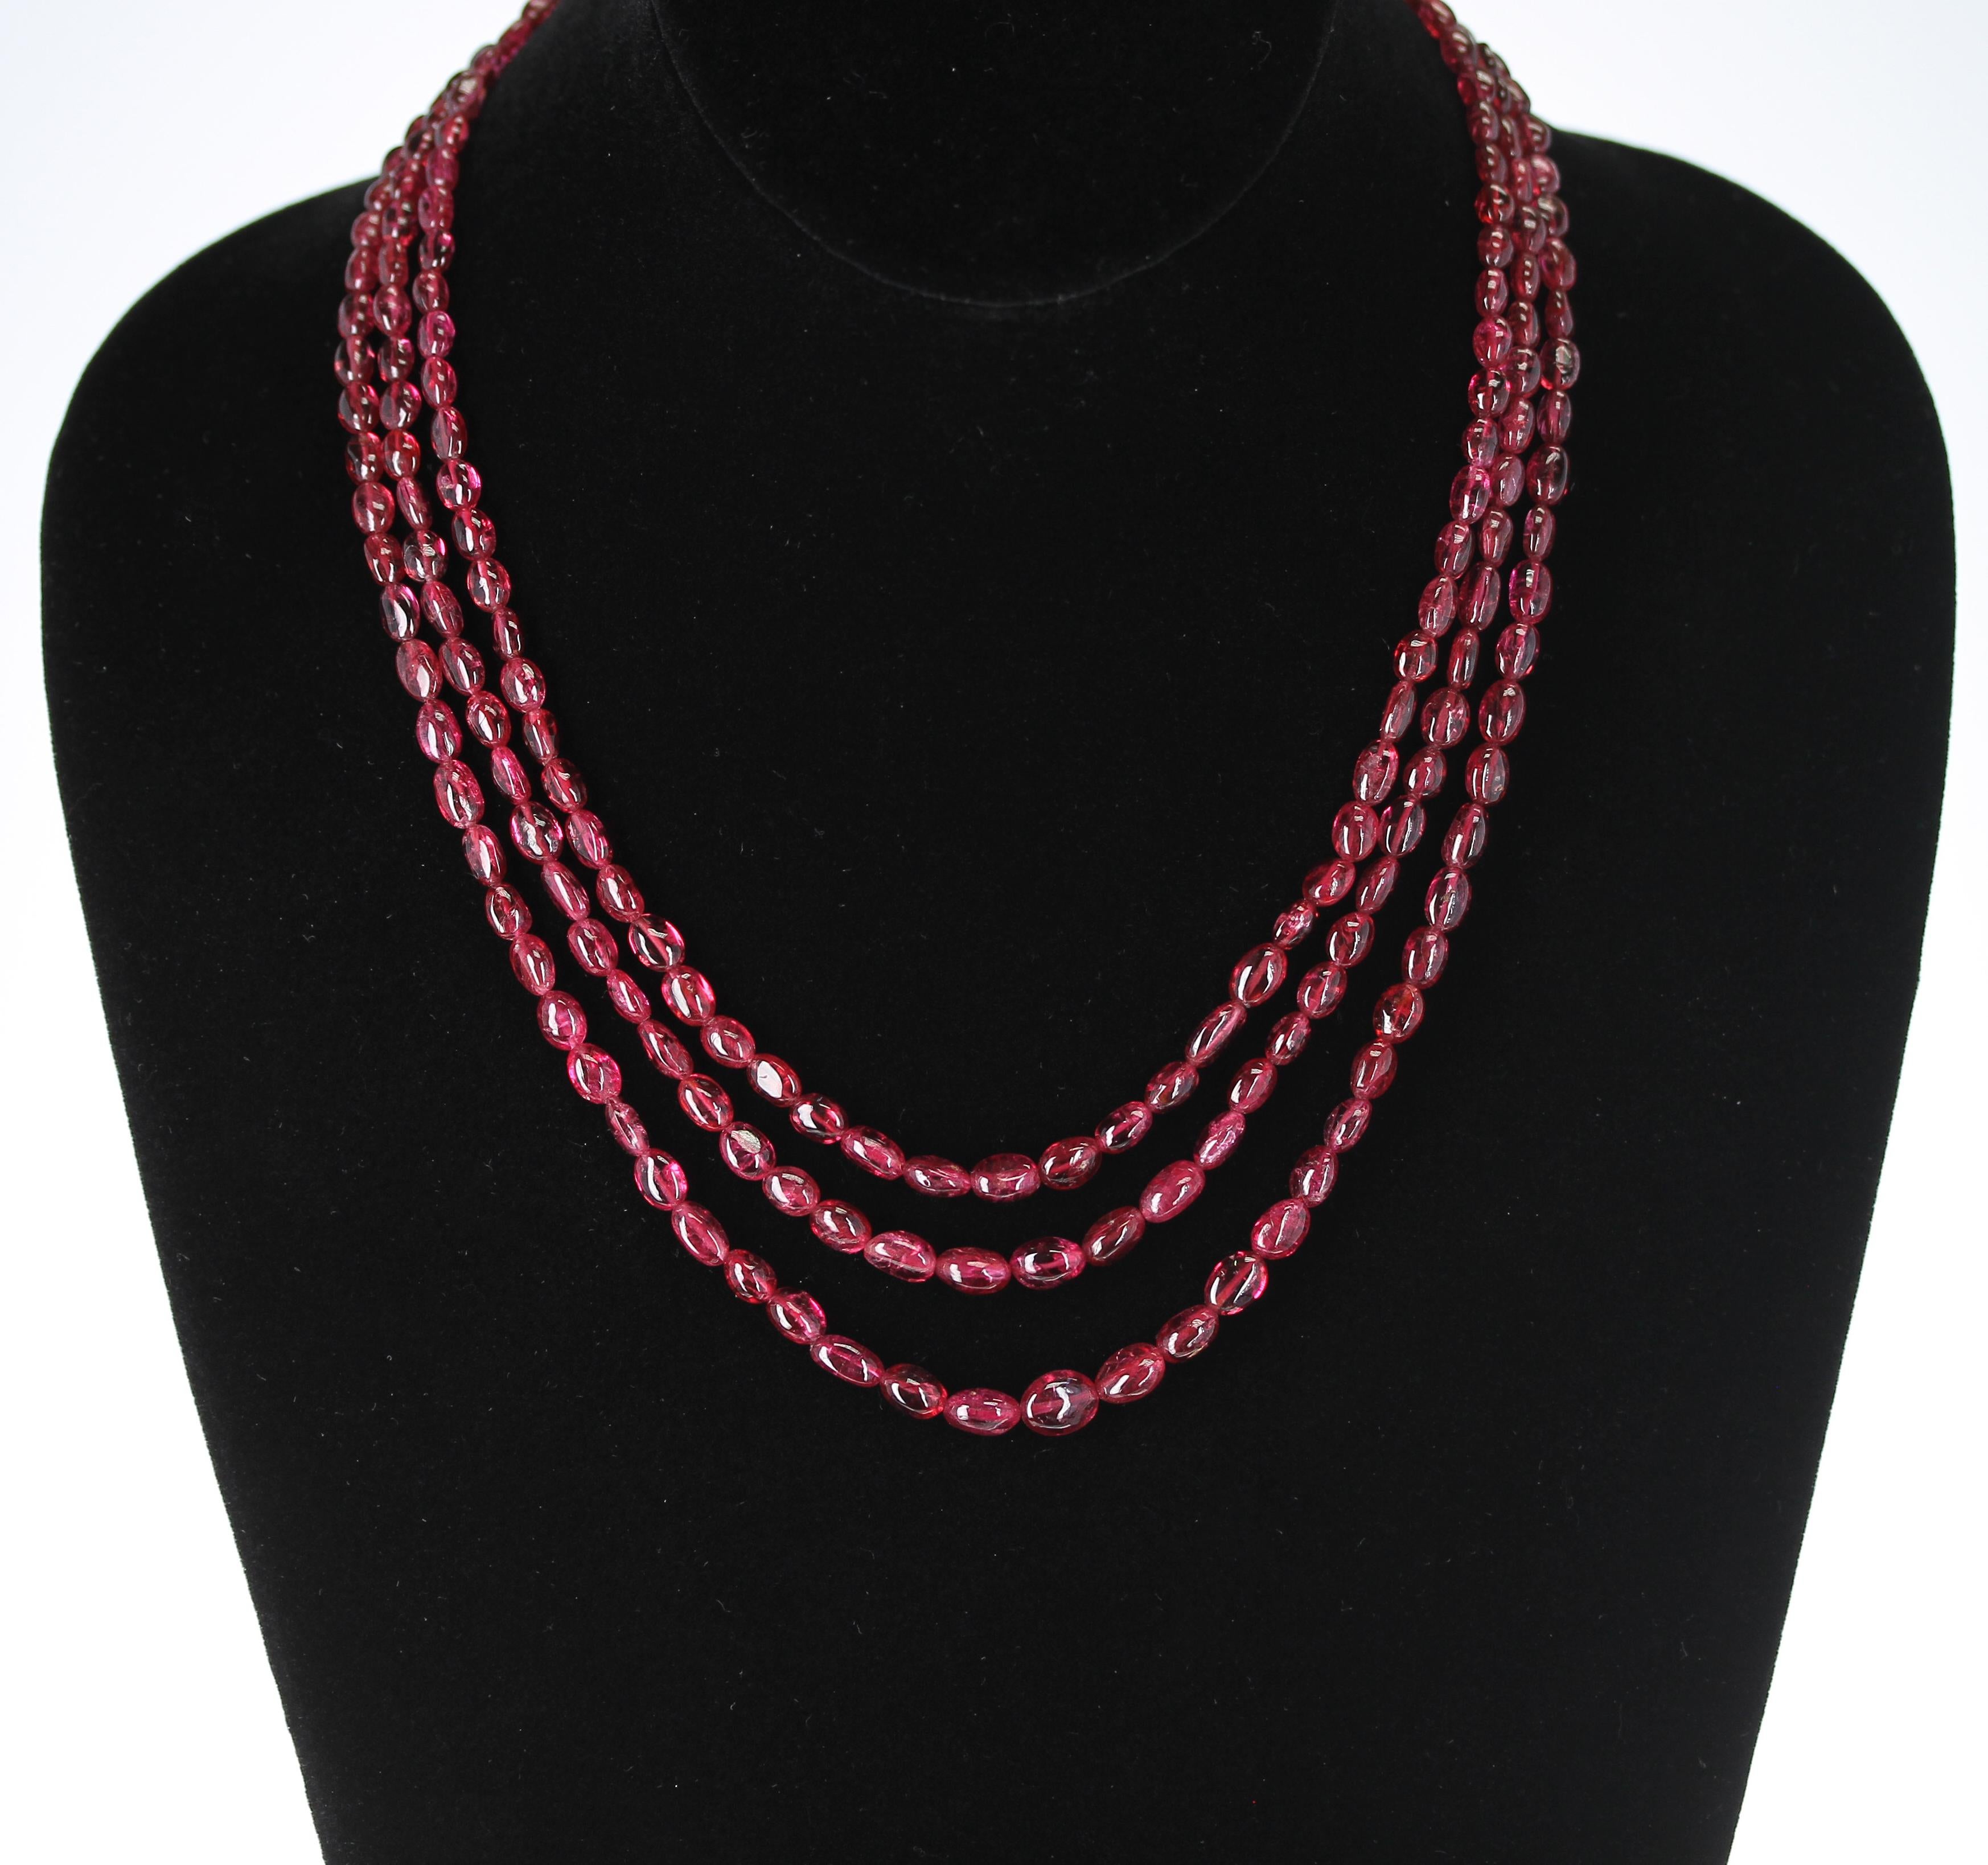 A Genuine & Natural Tumbled & Smooth Spinel Beads Necklace with 3 Strands, and a 14K Clasp. The necklace weighs 238 carats, the length is from 17.50 to 19.50 inches, and the size of the beads range from 4MM to 8MM. 
We can also customize the